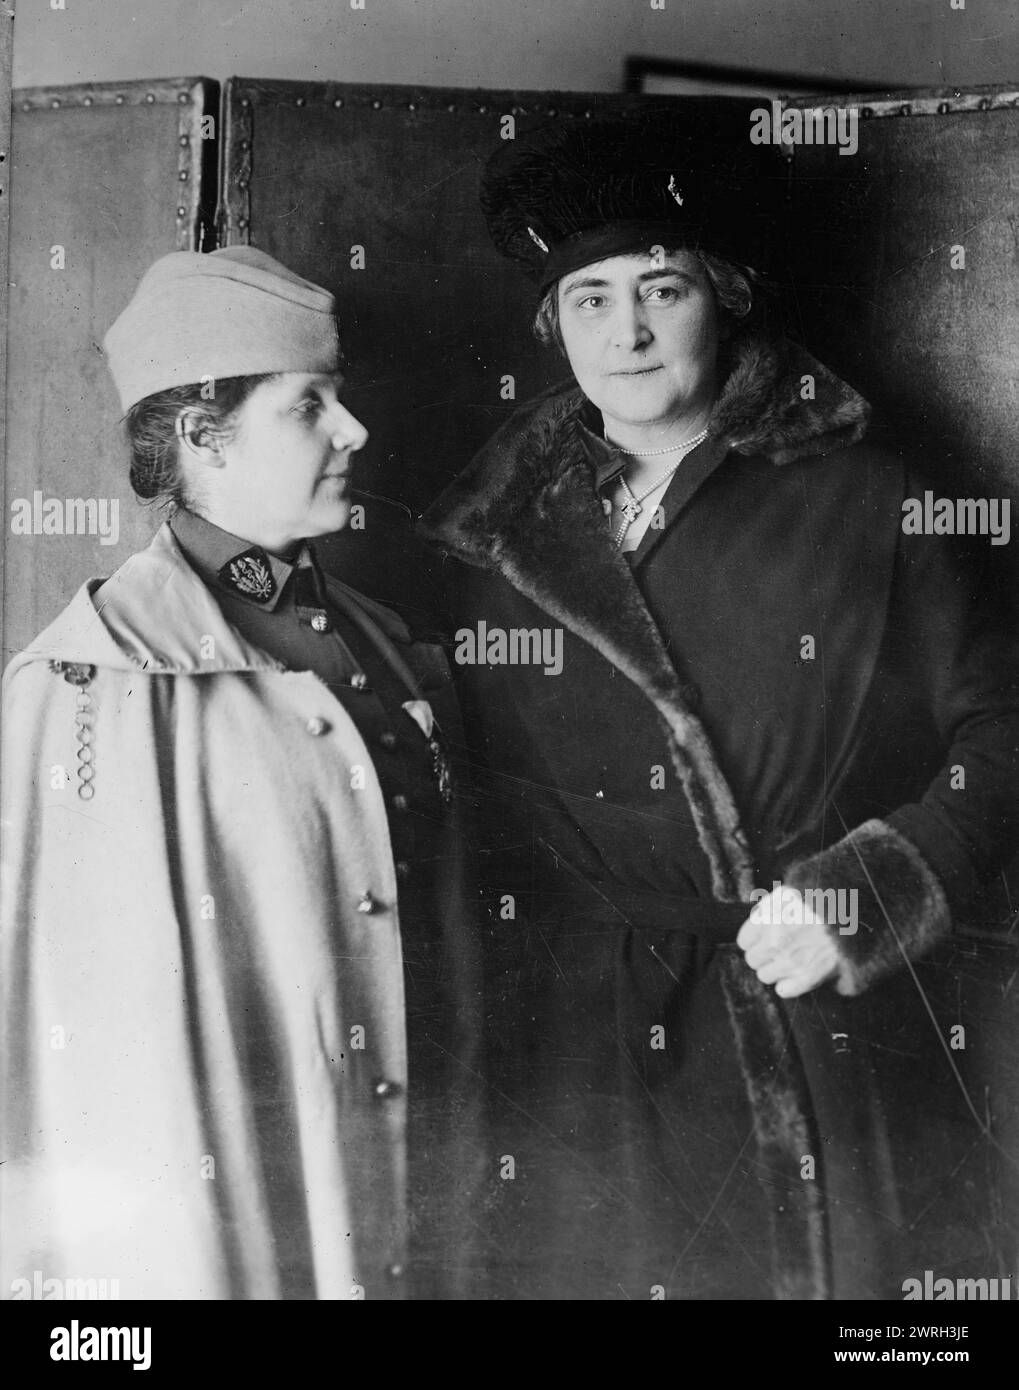 Dr. Rosalie S. Morton, Anne Morgan, between c1915 and c1920. Dr. Rosalie Slaughter (1876-1968), co-founder of the American Women's Hospitals Service, and Anne Tracy Morgan (1873-1952), philanthropist, who worked to provide relief in World War I. Stock Photo